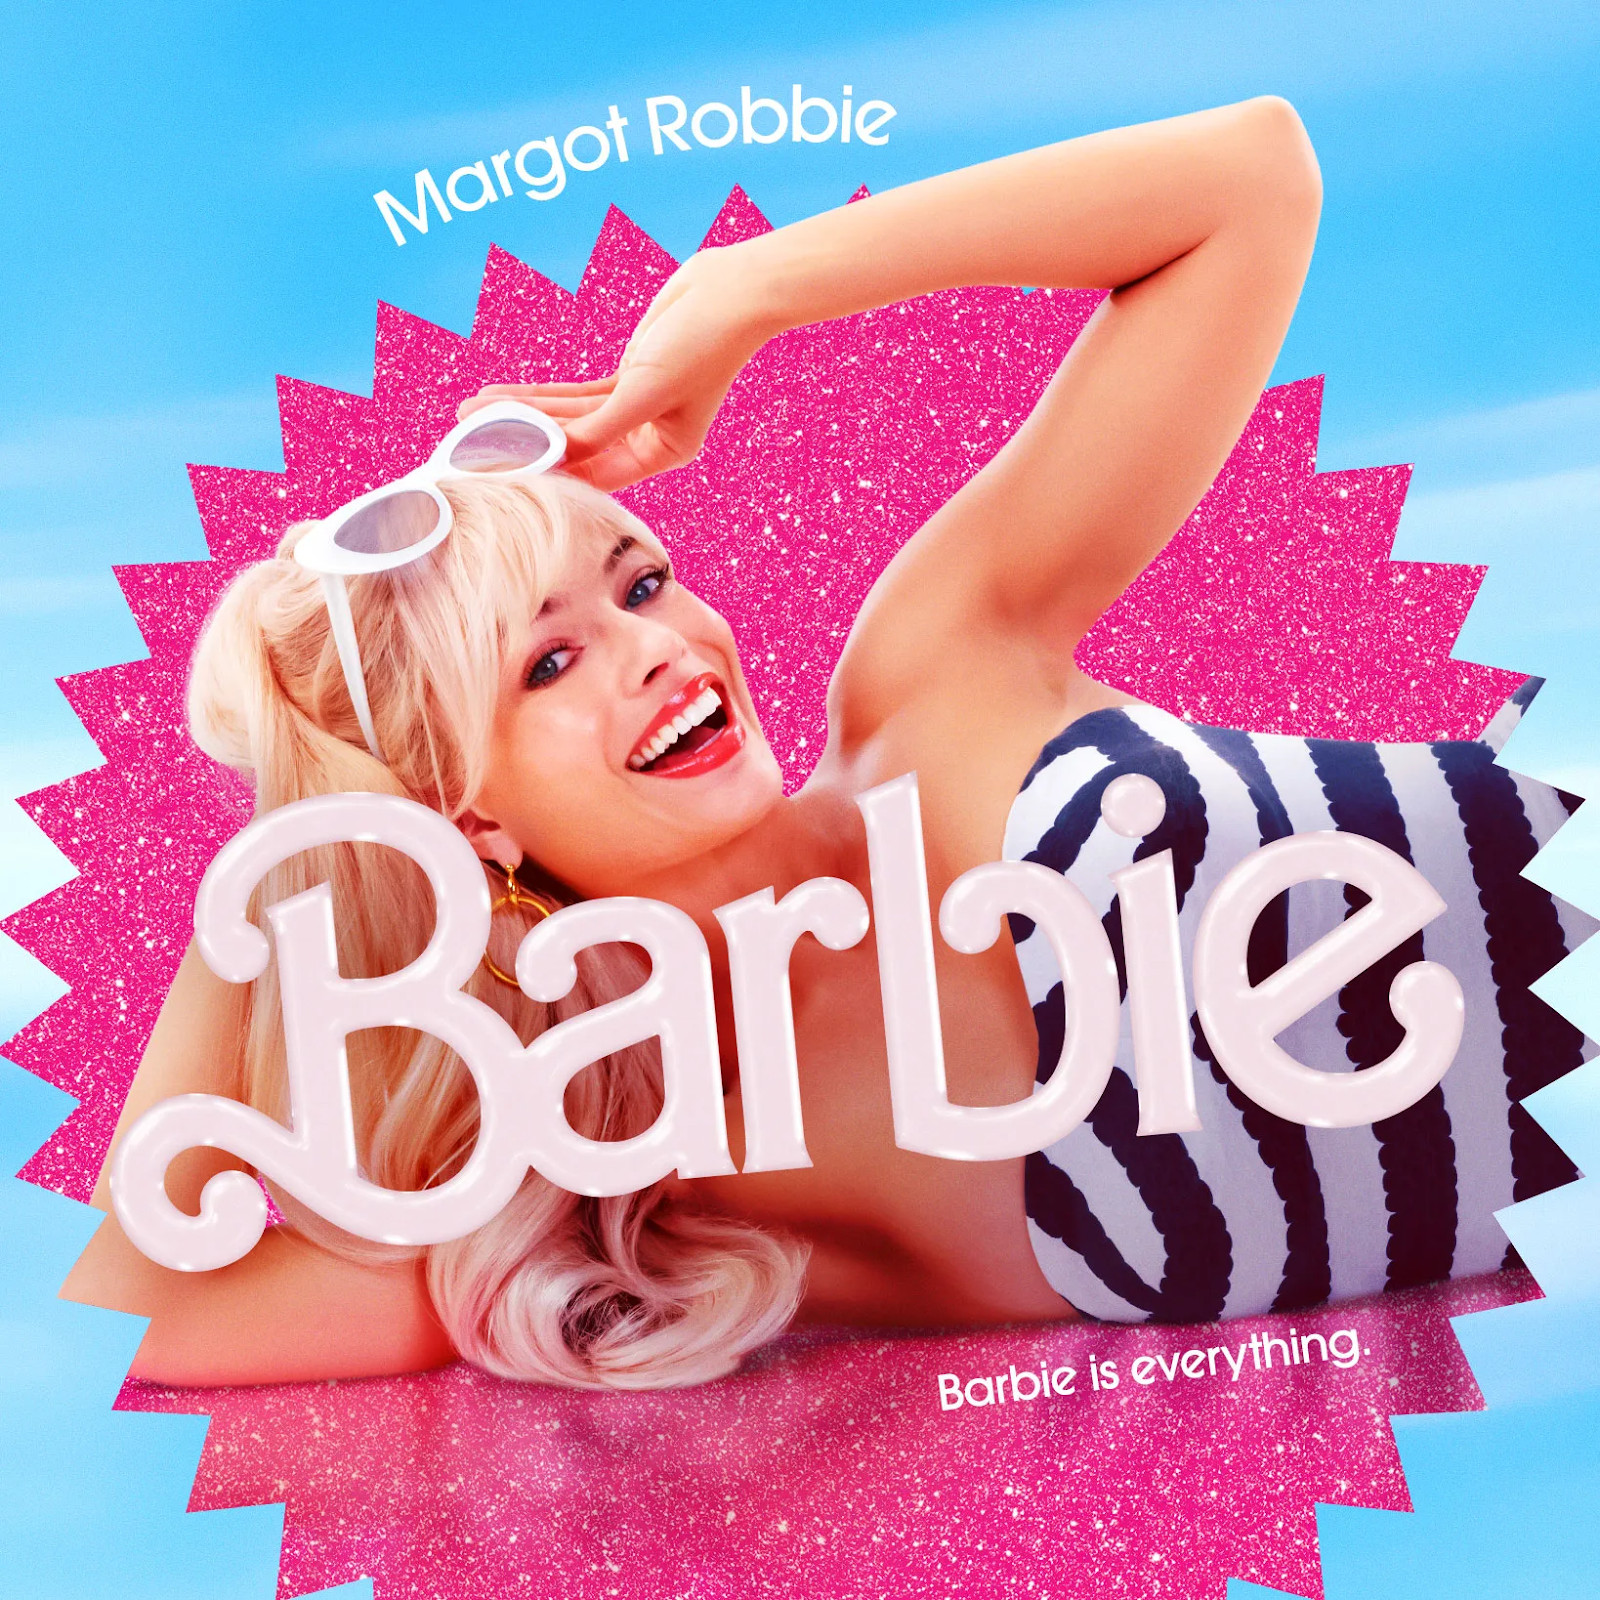 Barbie movie poster with margo robbie laying on her side with an arm in the air.